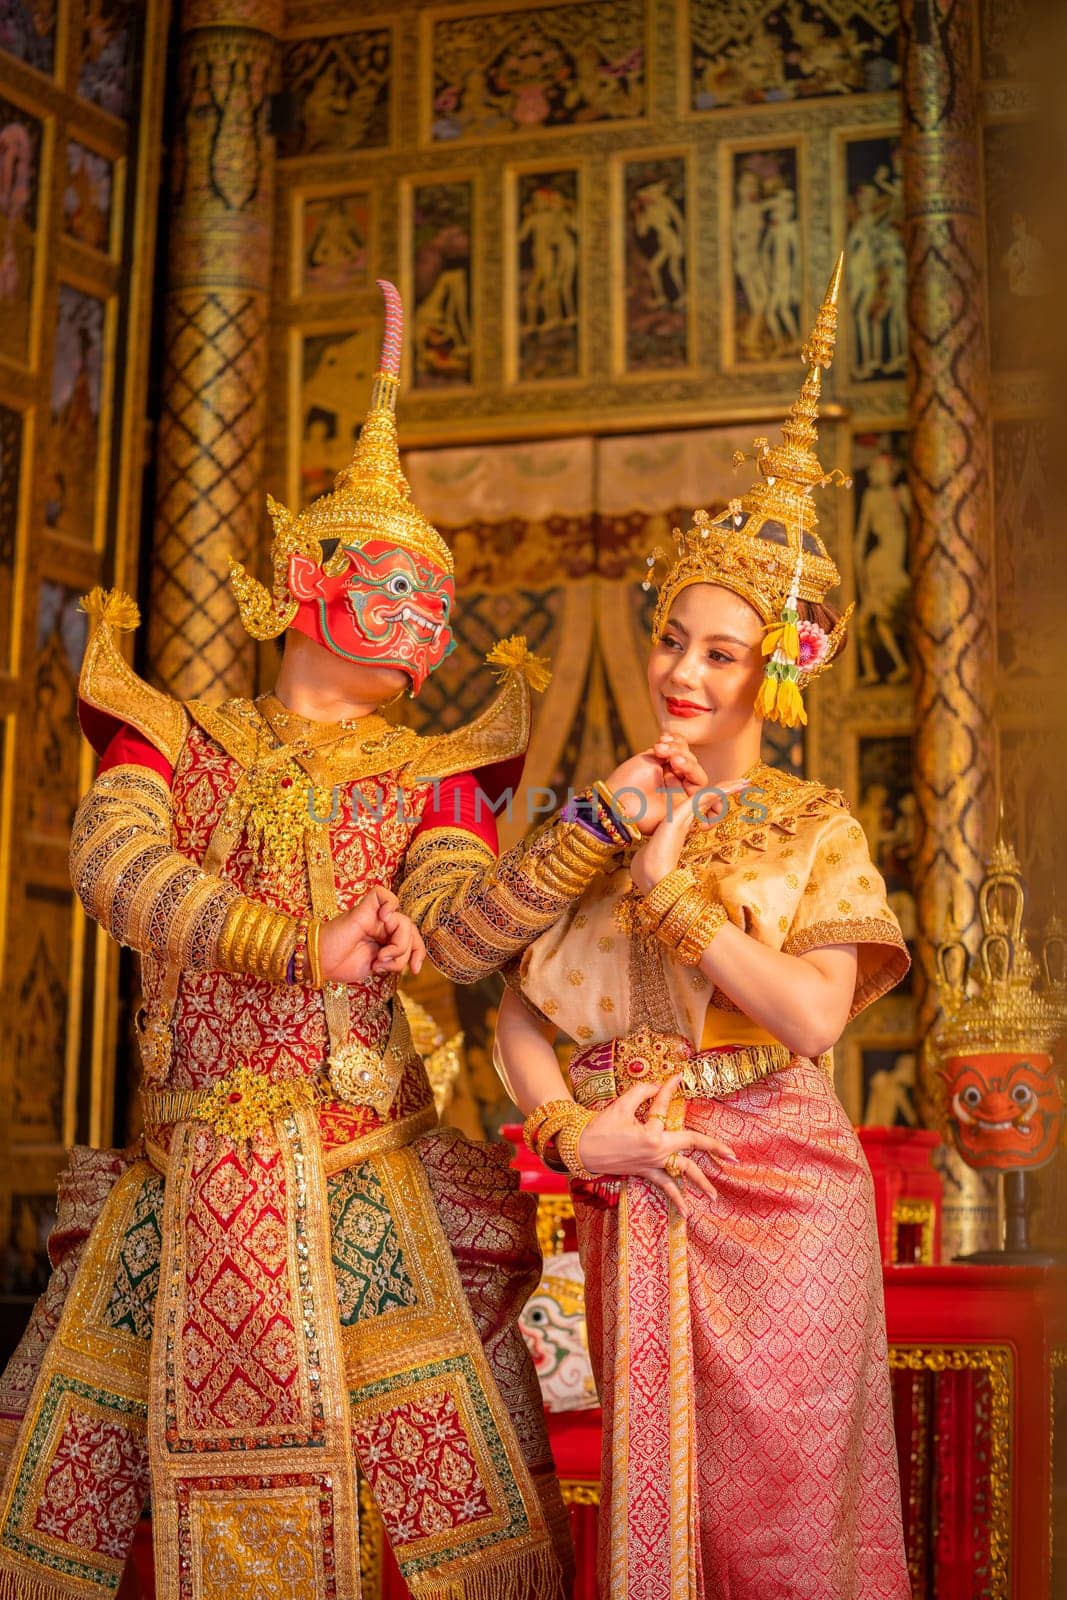 Pantomime (Khon) or traditional Thai classic masked play enacting scenes from the Ramakien (Ramayana) red giant stay with woman with a background of Thai paintings in a public place.